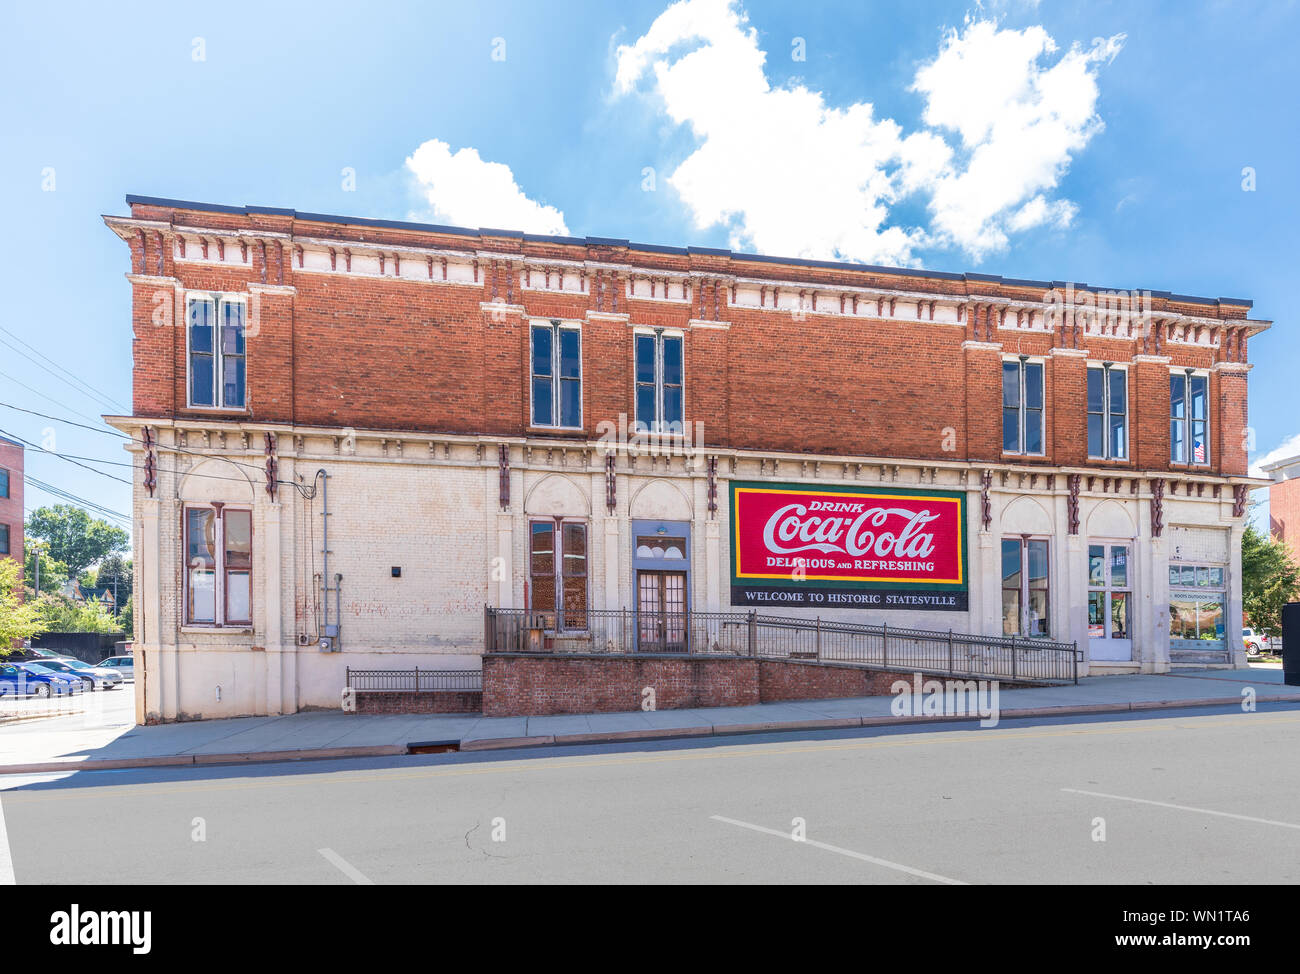 STATESVILLE, NC, USA-1 SEPTEMBER 2019: An old commercial building in down town, with Coca-cola ad, and sign saying 'Welcome to Historic Statesville'. Stock Photo